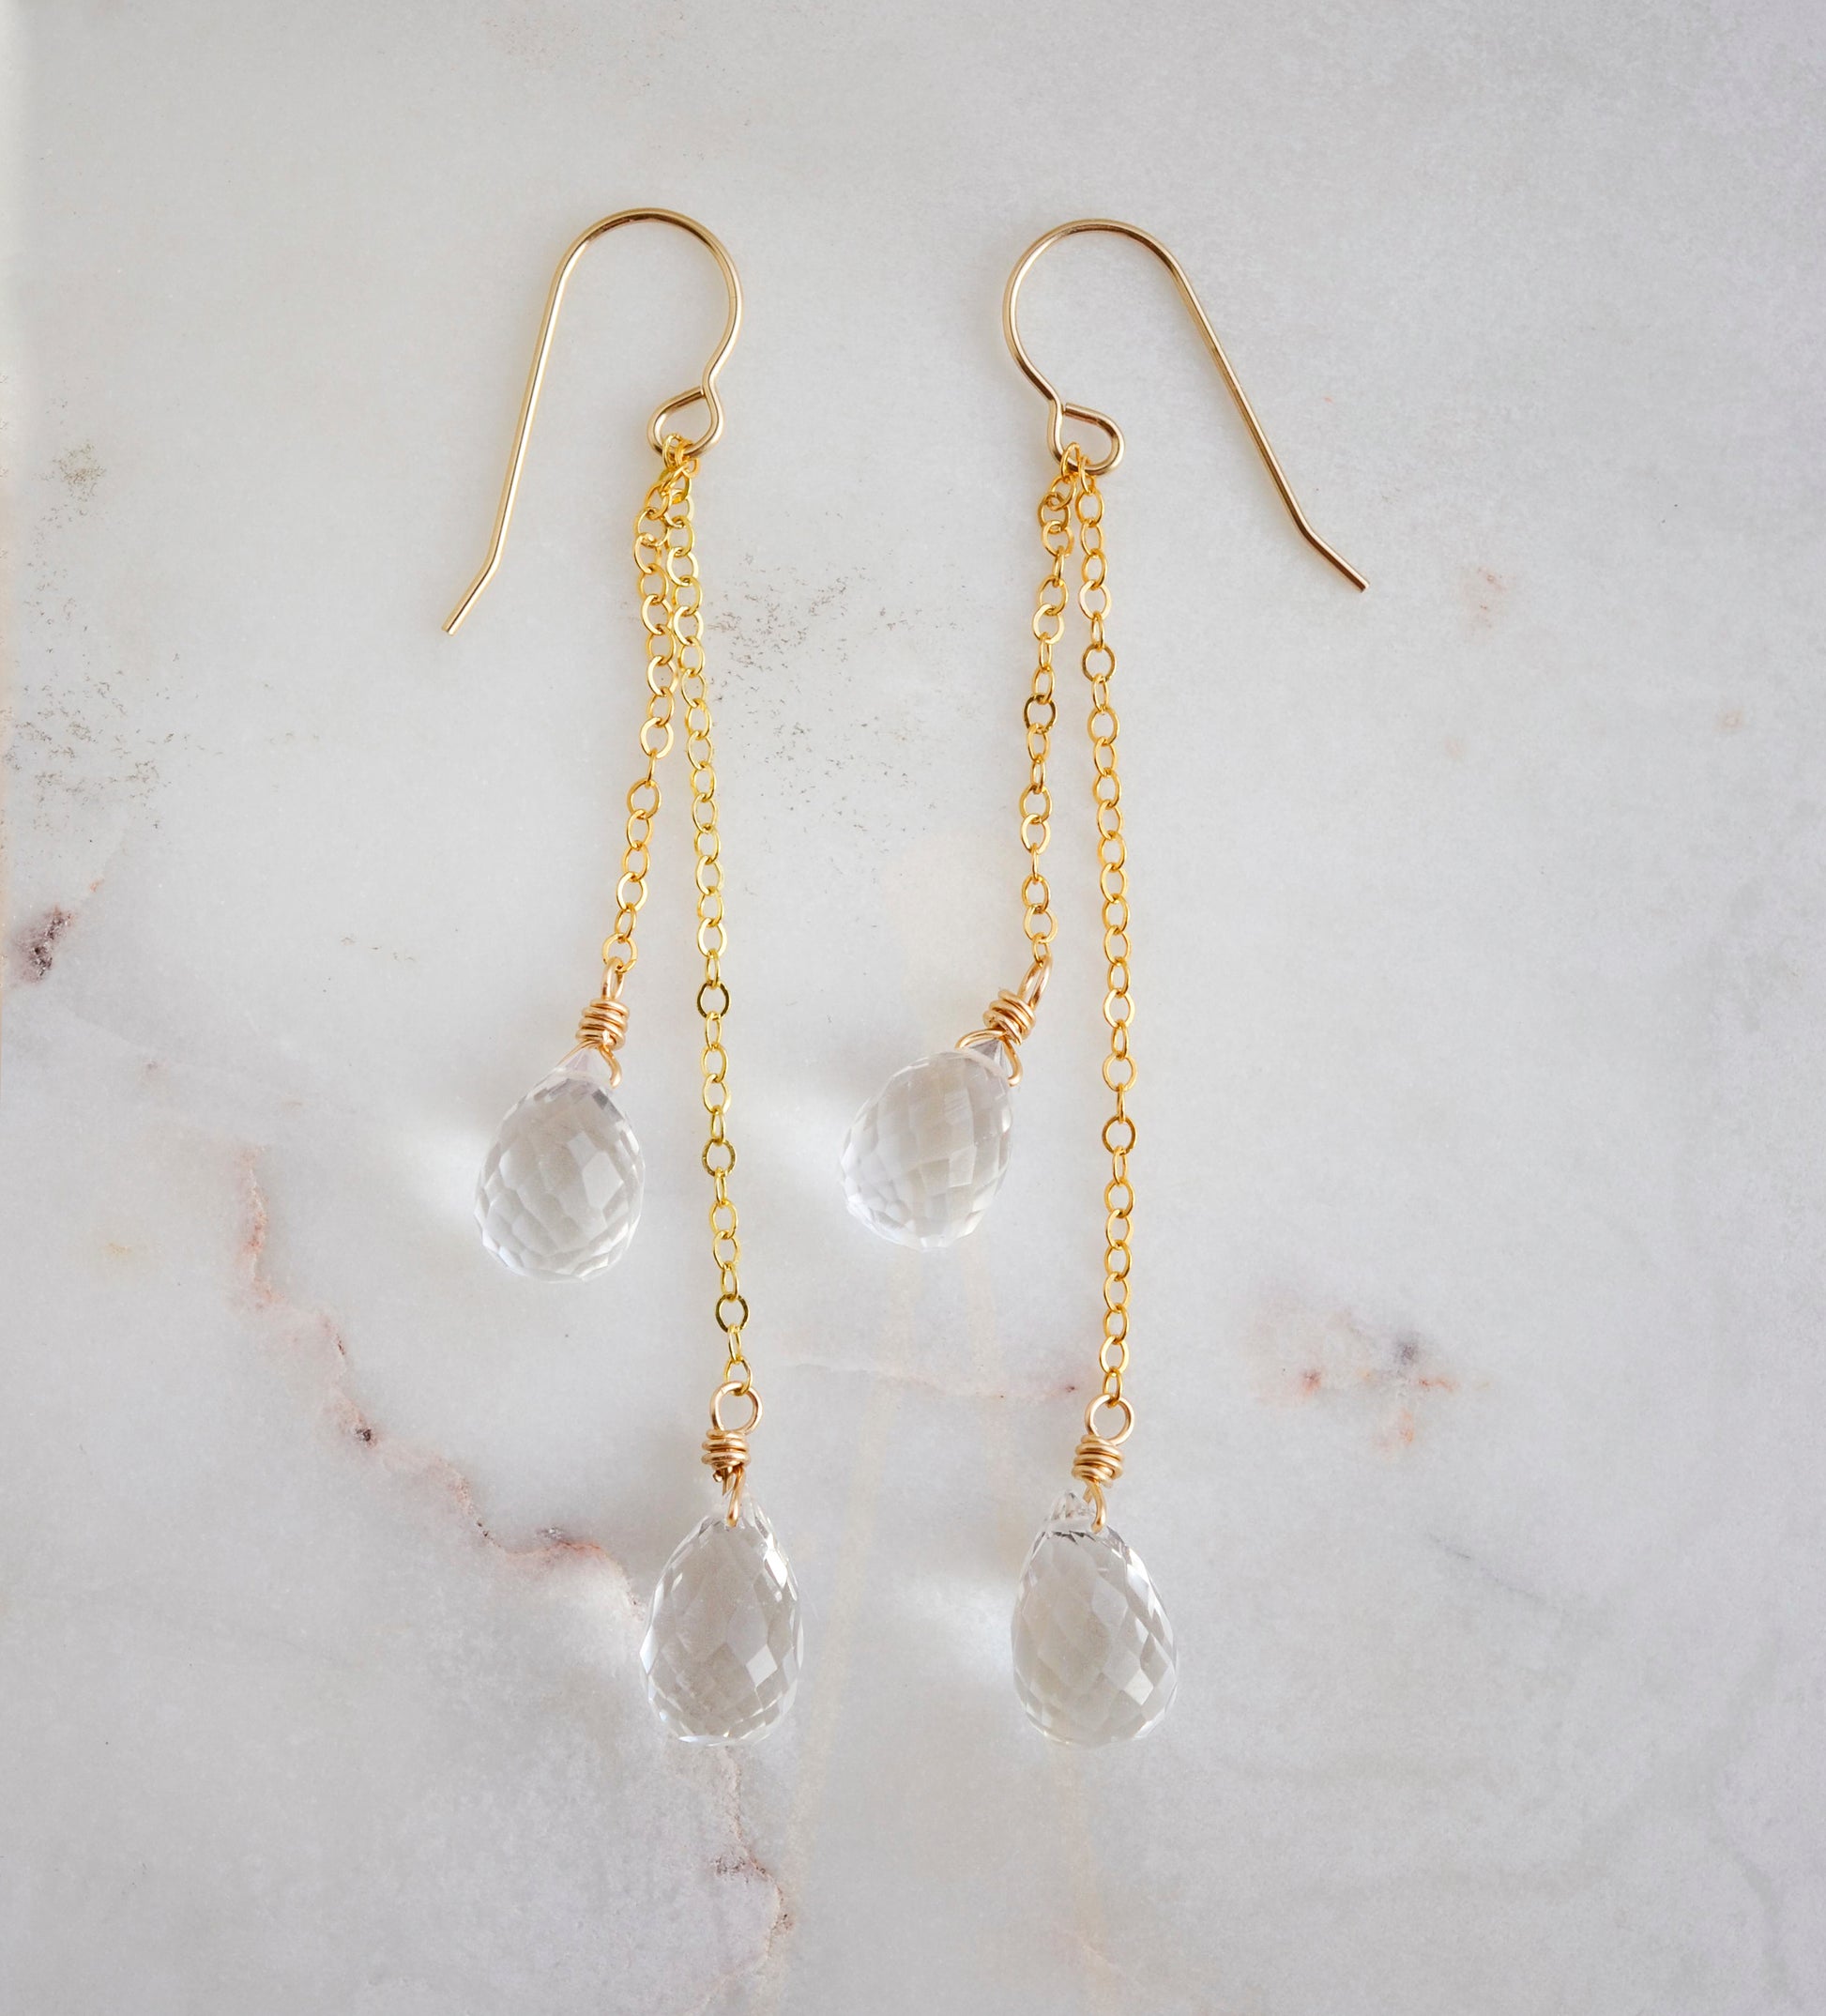 Long clear crystal quartz earrings with two teardrop dangles hanging from a dainty 14k gold filled chain.